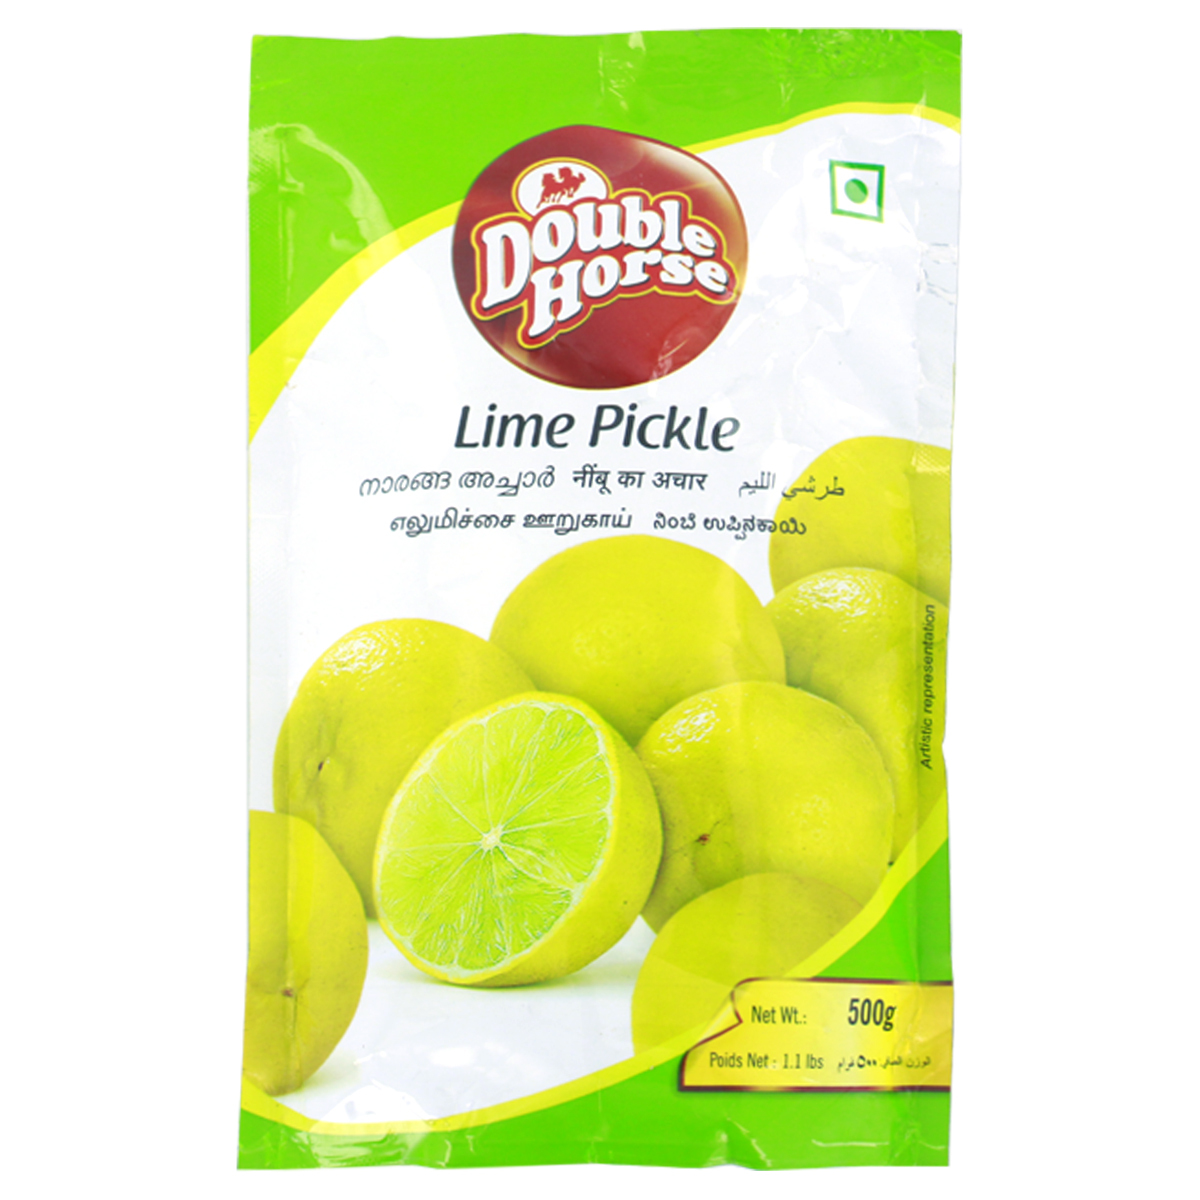 Double Horse Lime Pickle 500g